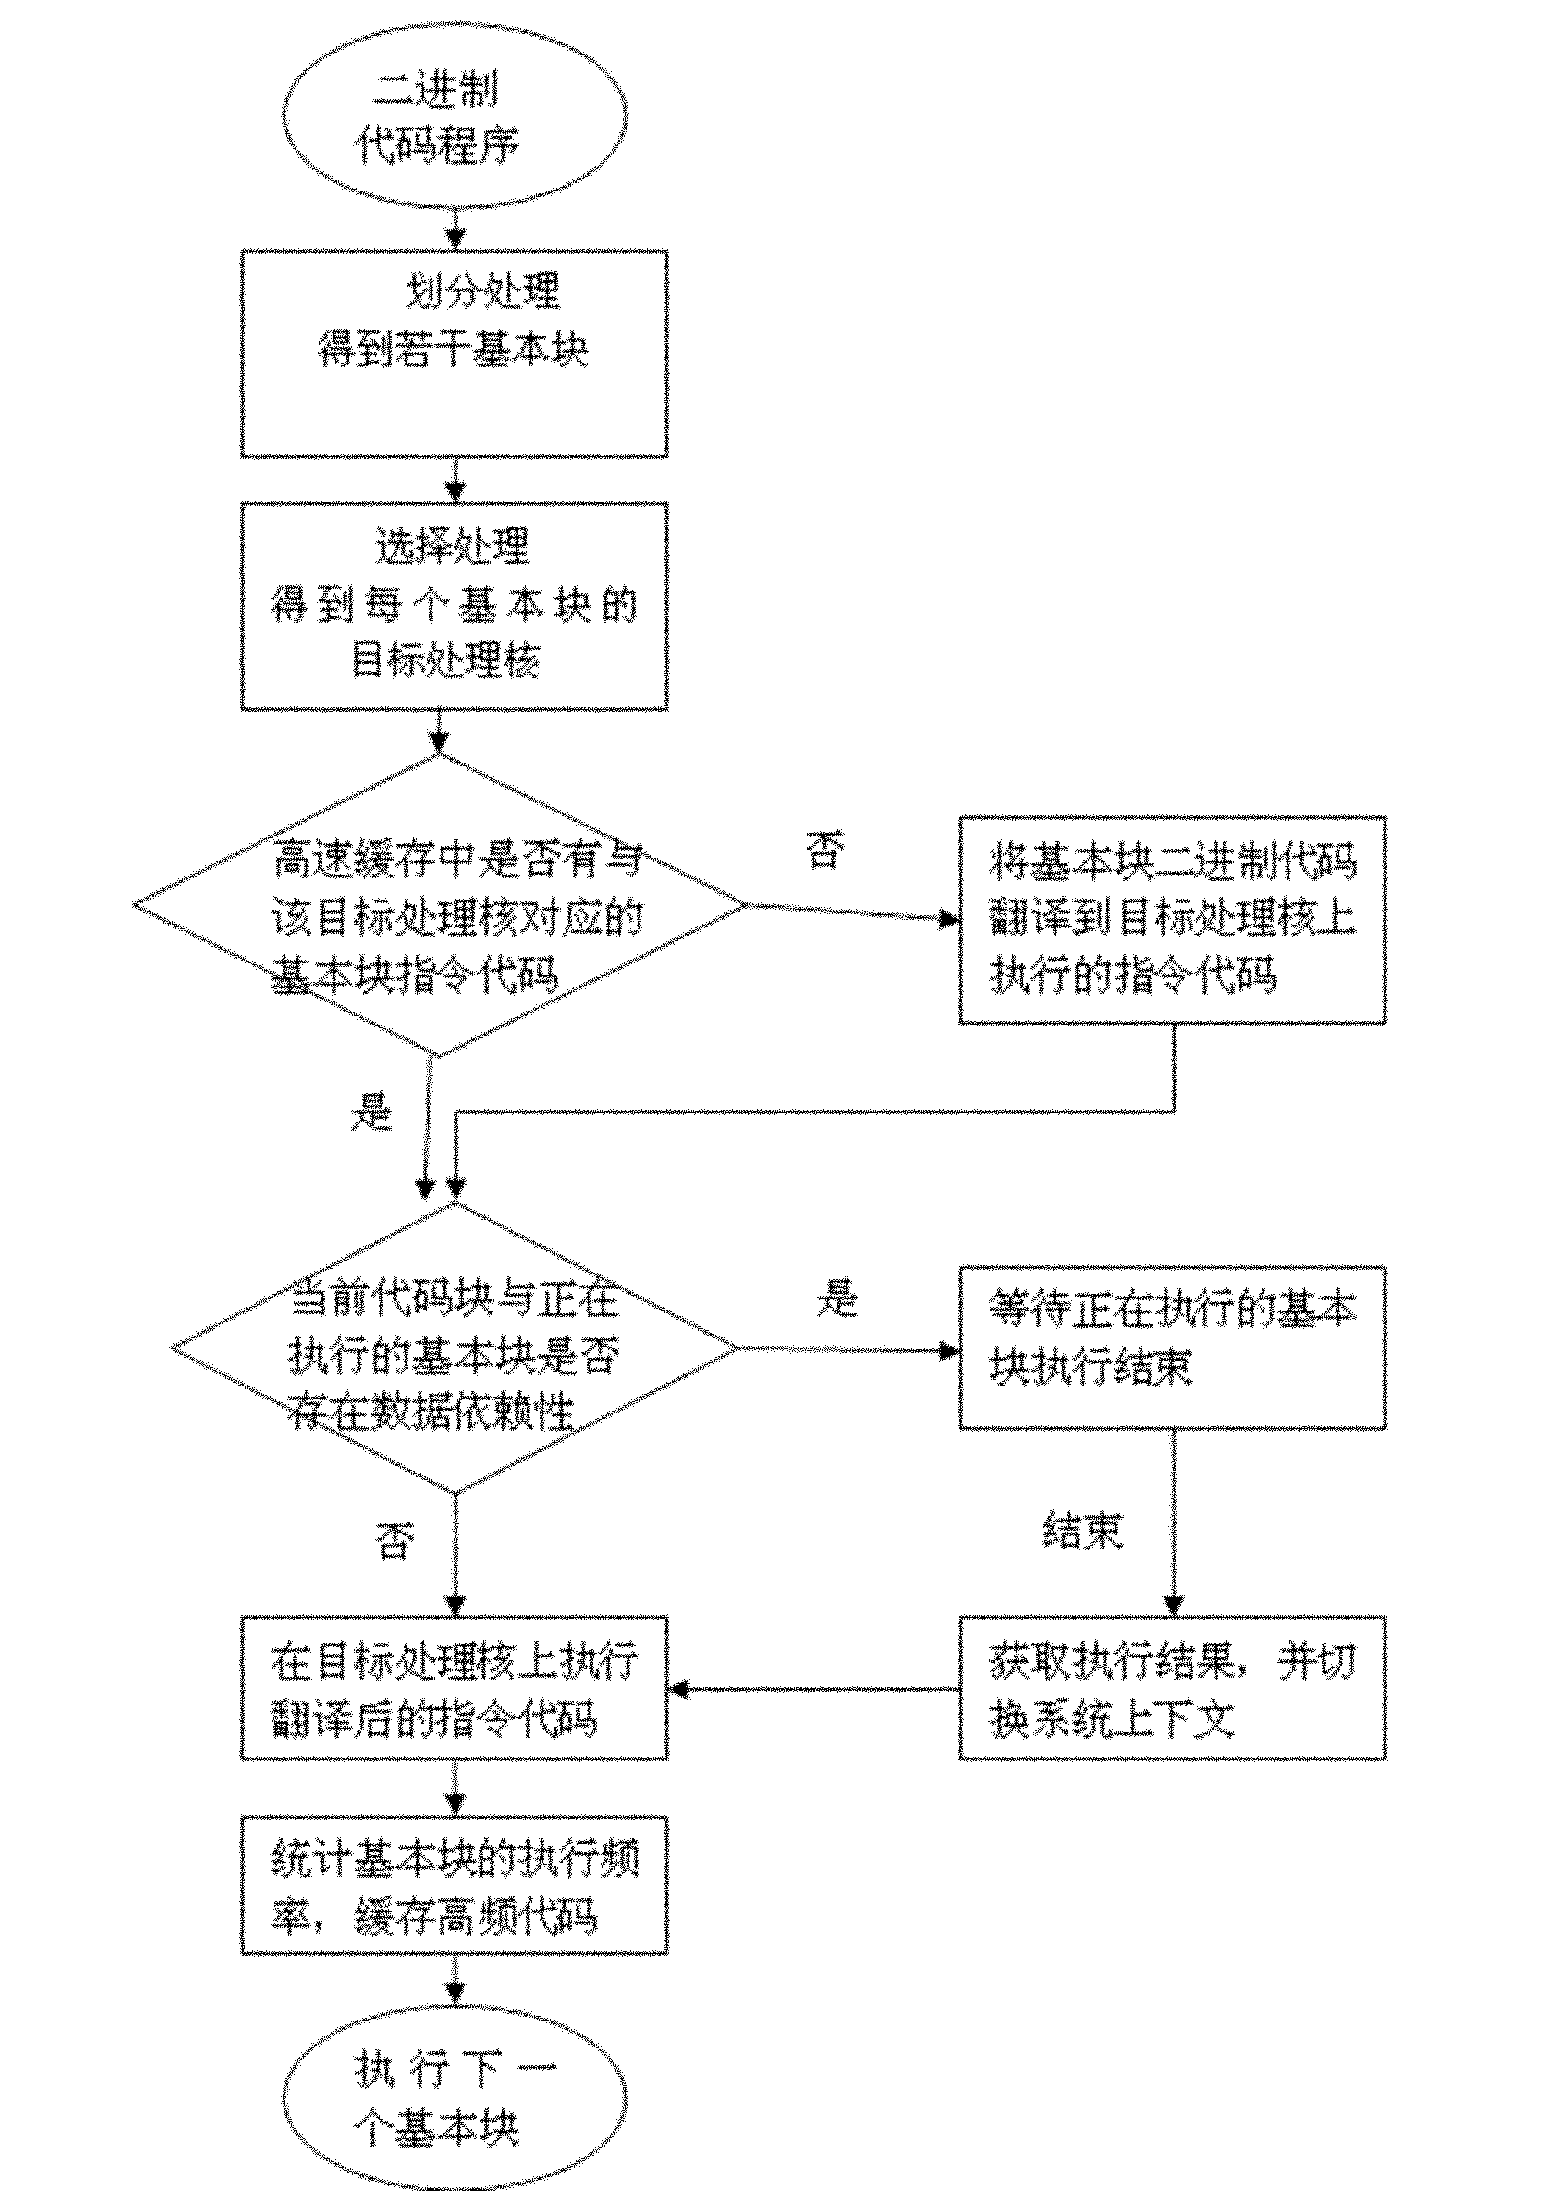 Method for executing dynamic allocation command on embedded heterogeneous multi-core